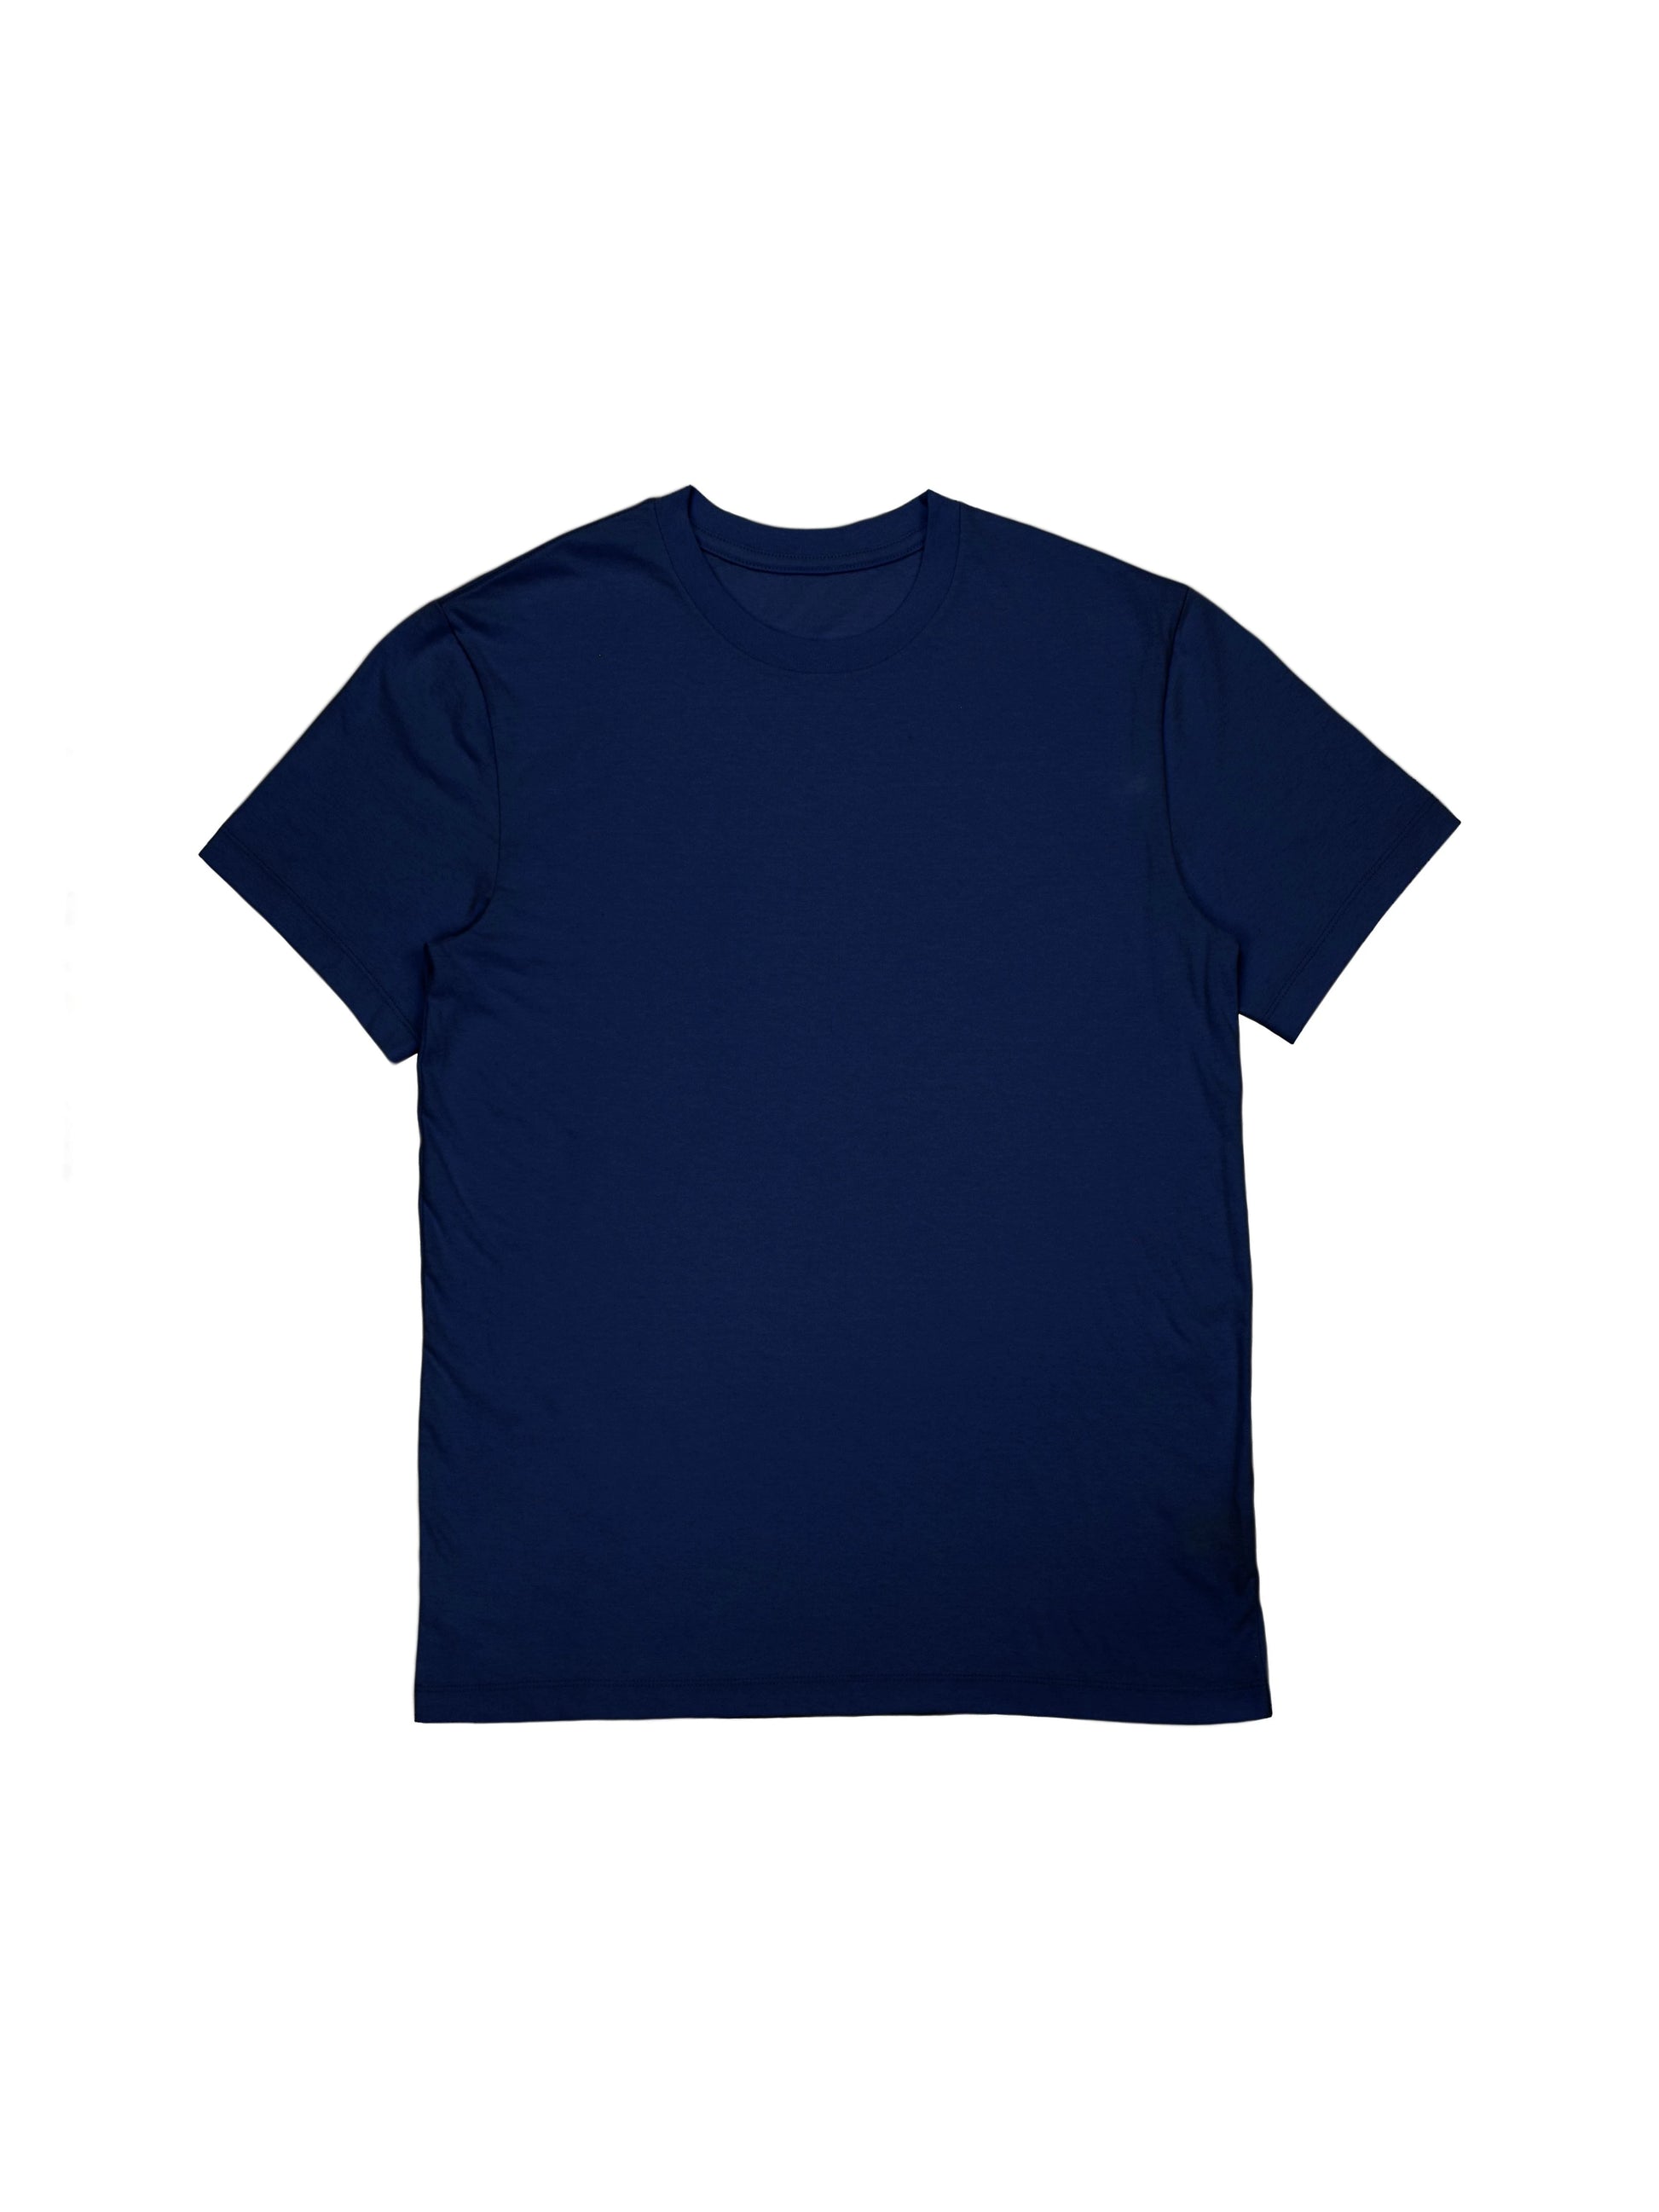 Boxy Fit Navy Blue T-Shirt - 100% Organic Cotton Made In Canada